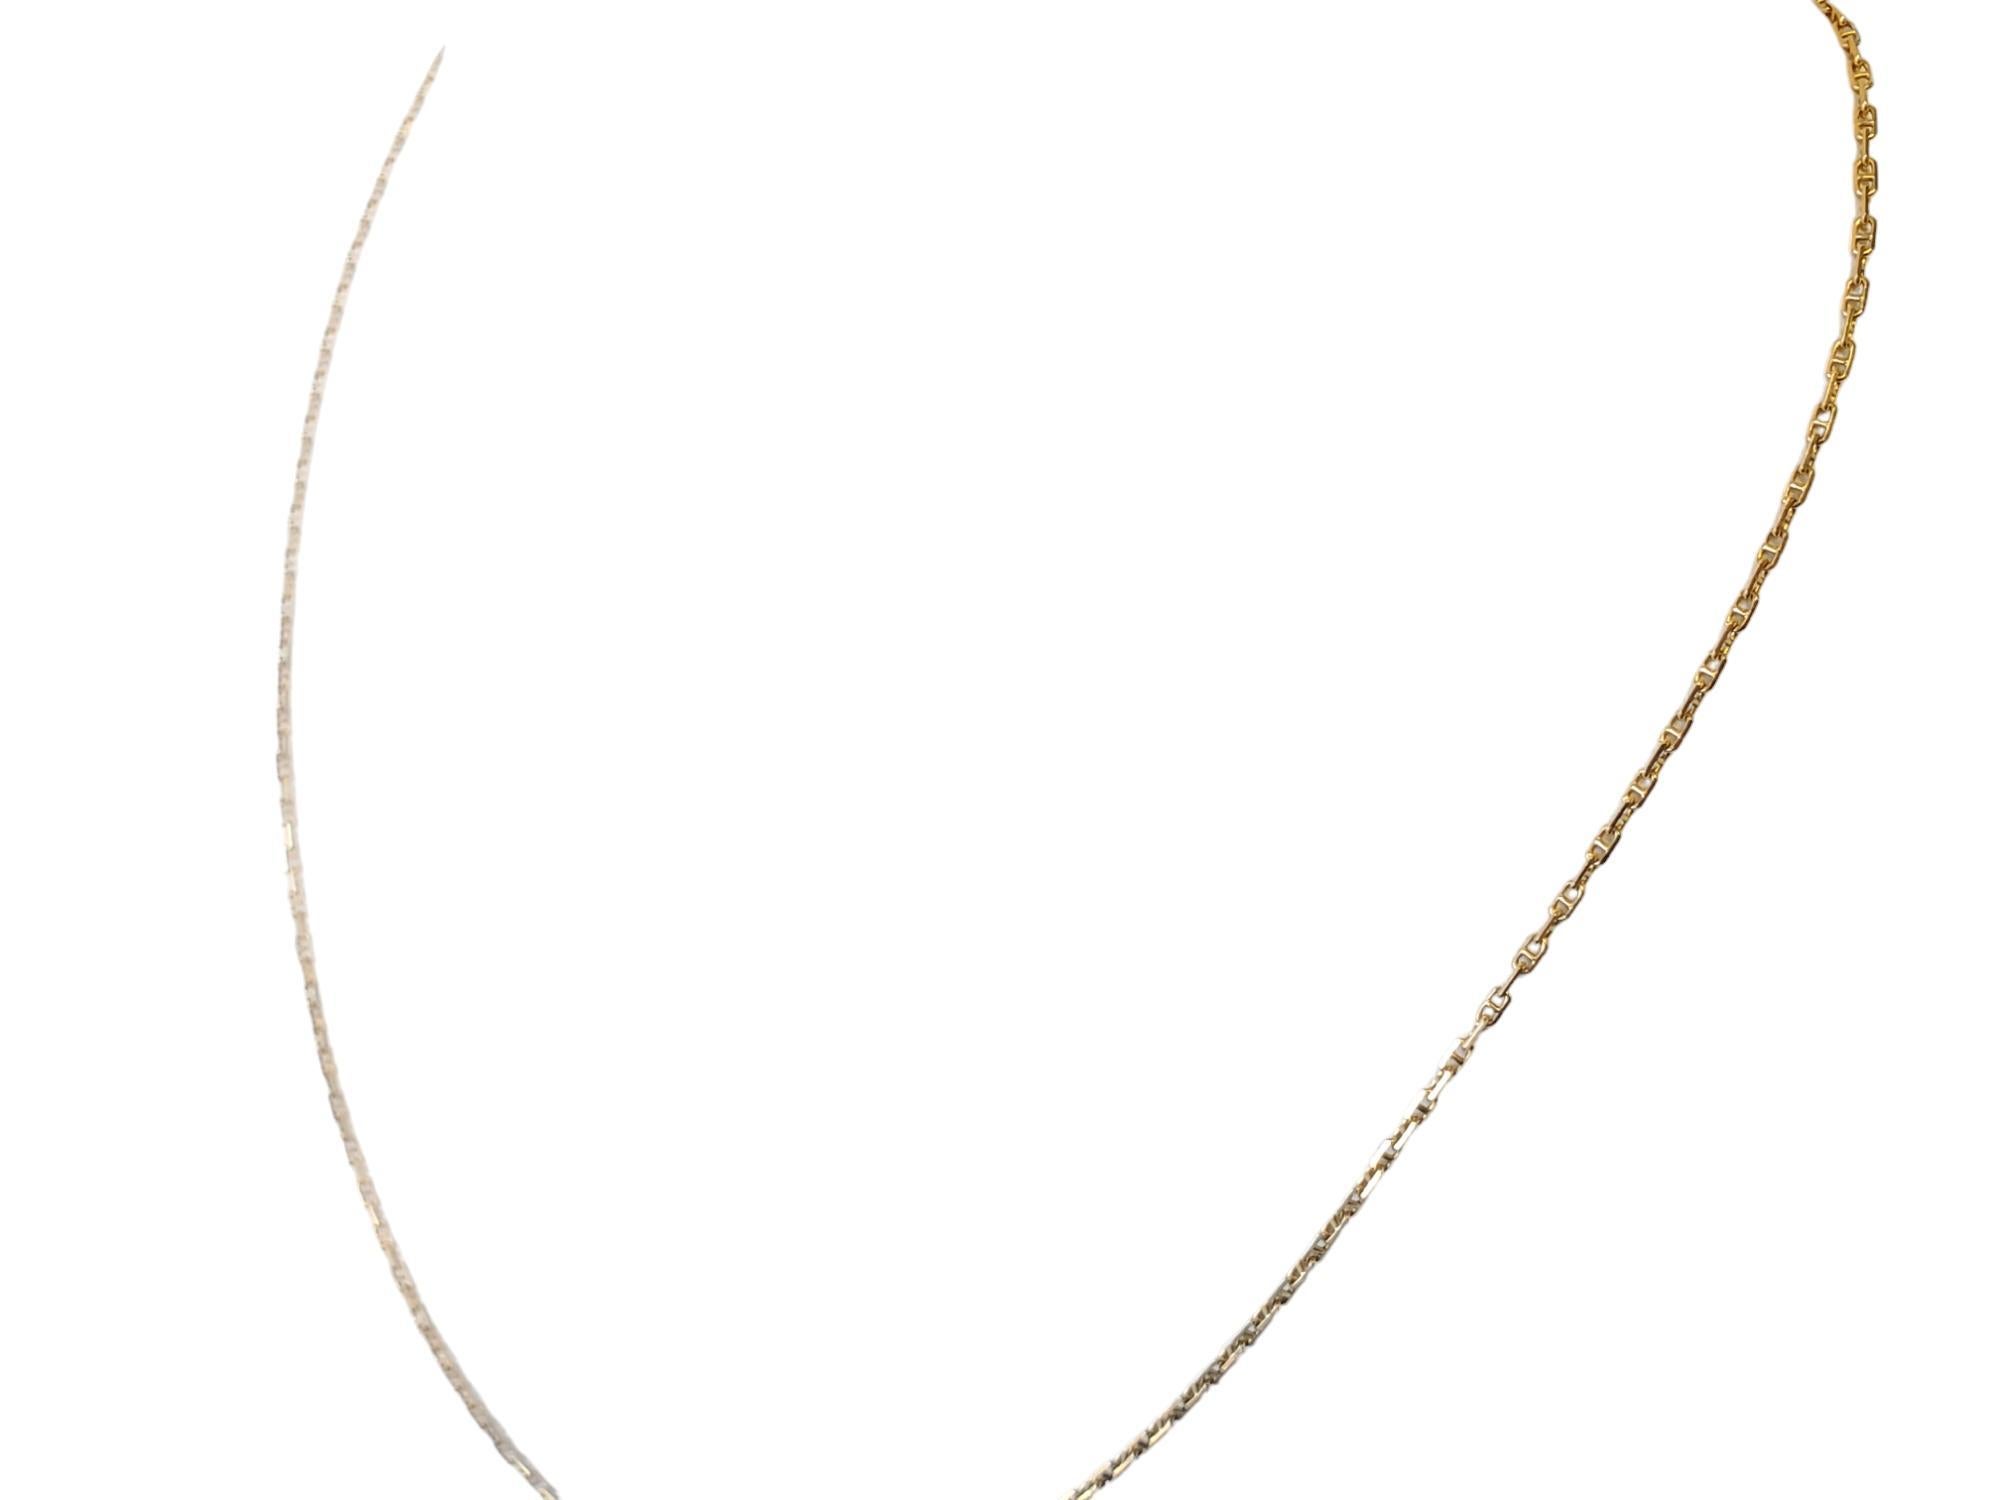 Vintage Italian 14k Chain Yellow Gold Stamped Link Necklace Minimalistic For Sale 1